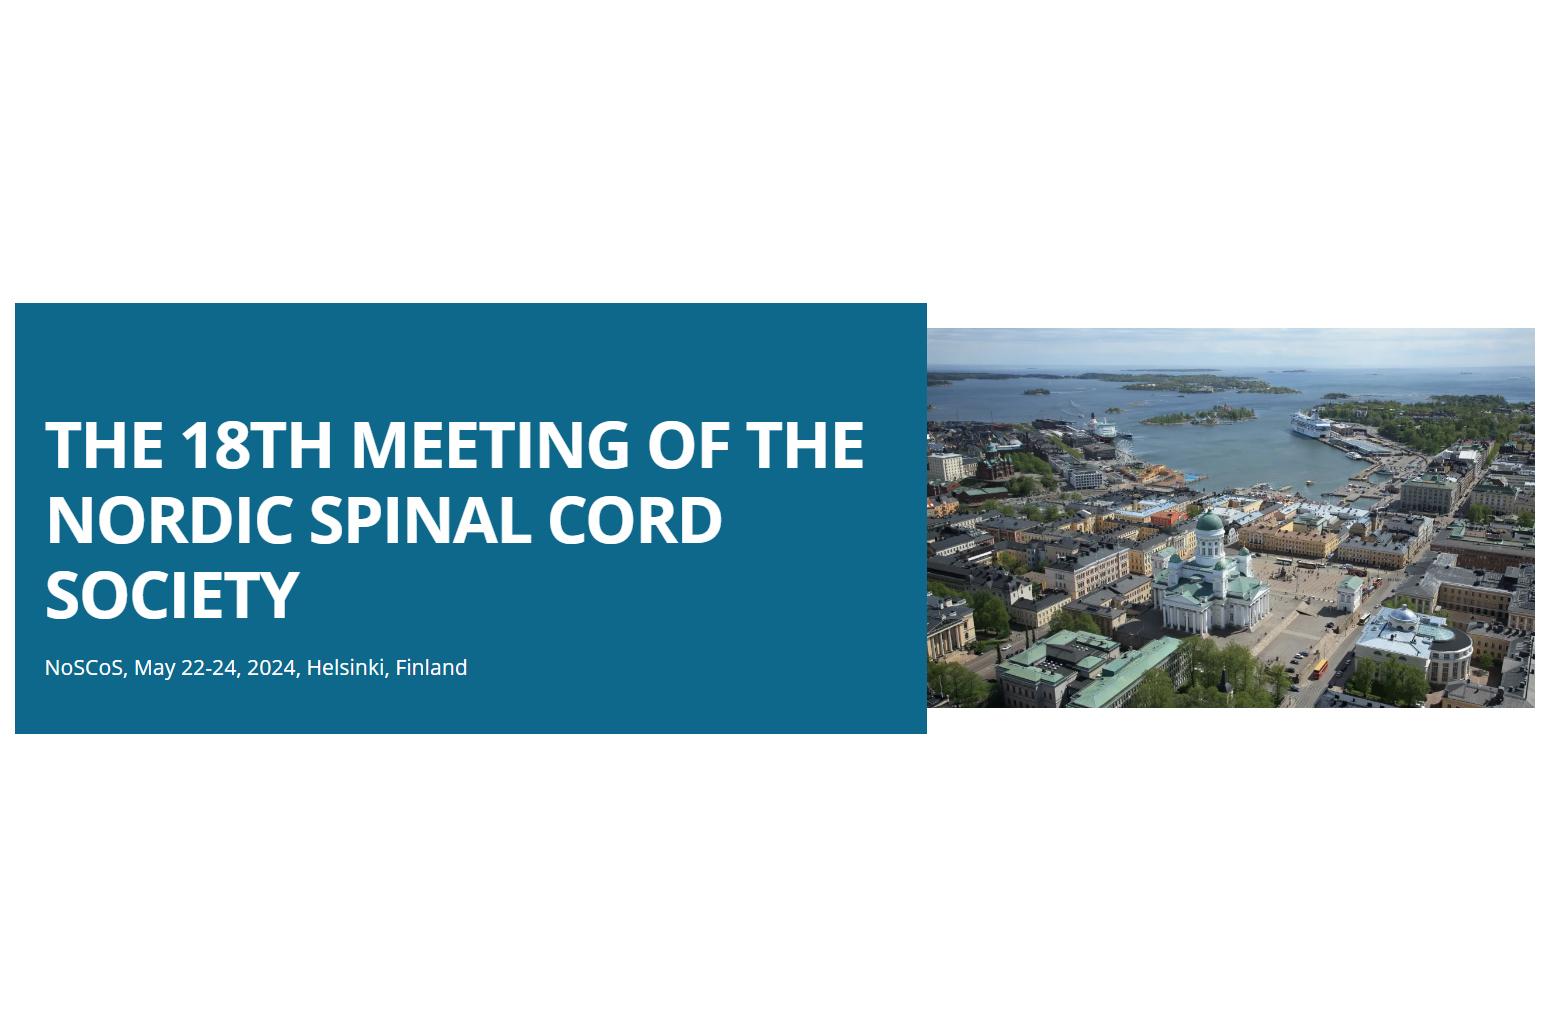 THE 18TH MEETING OF THE NORDIC SPINAL CORD SOCIETY